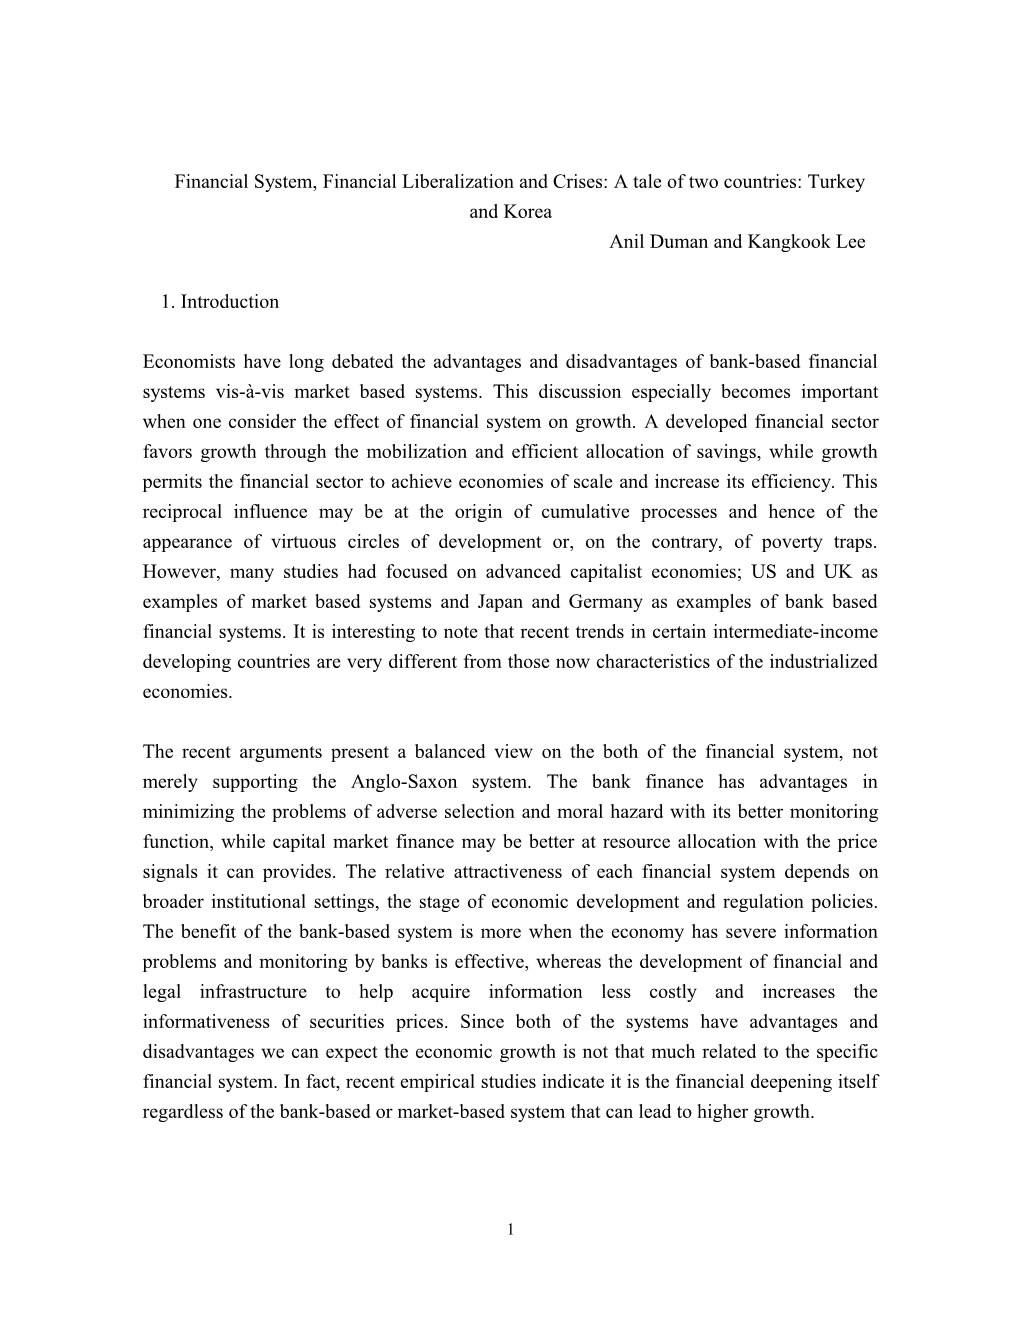 Financial System, Financial Liberalization and Crises : a Tale of Two Countries, Turkey